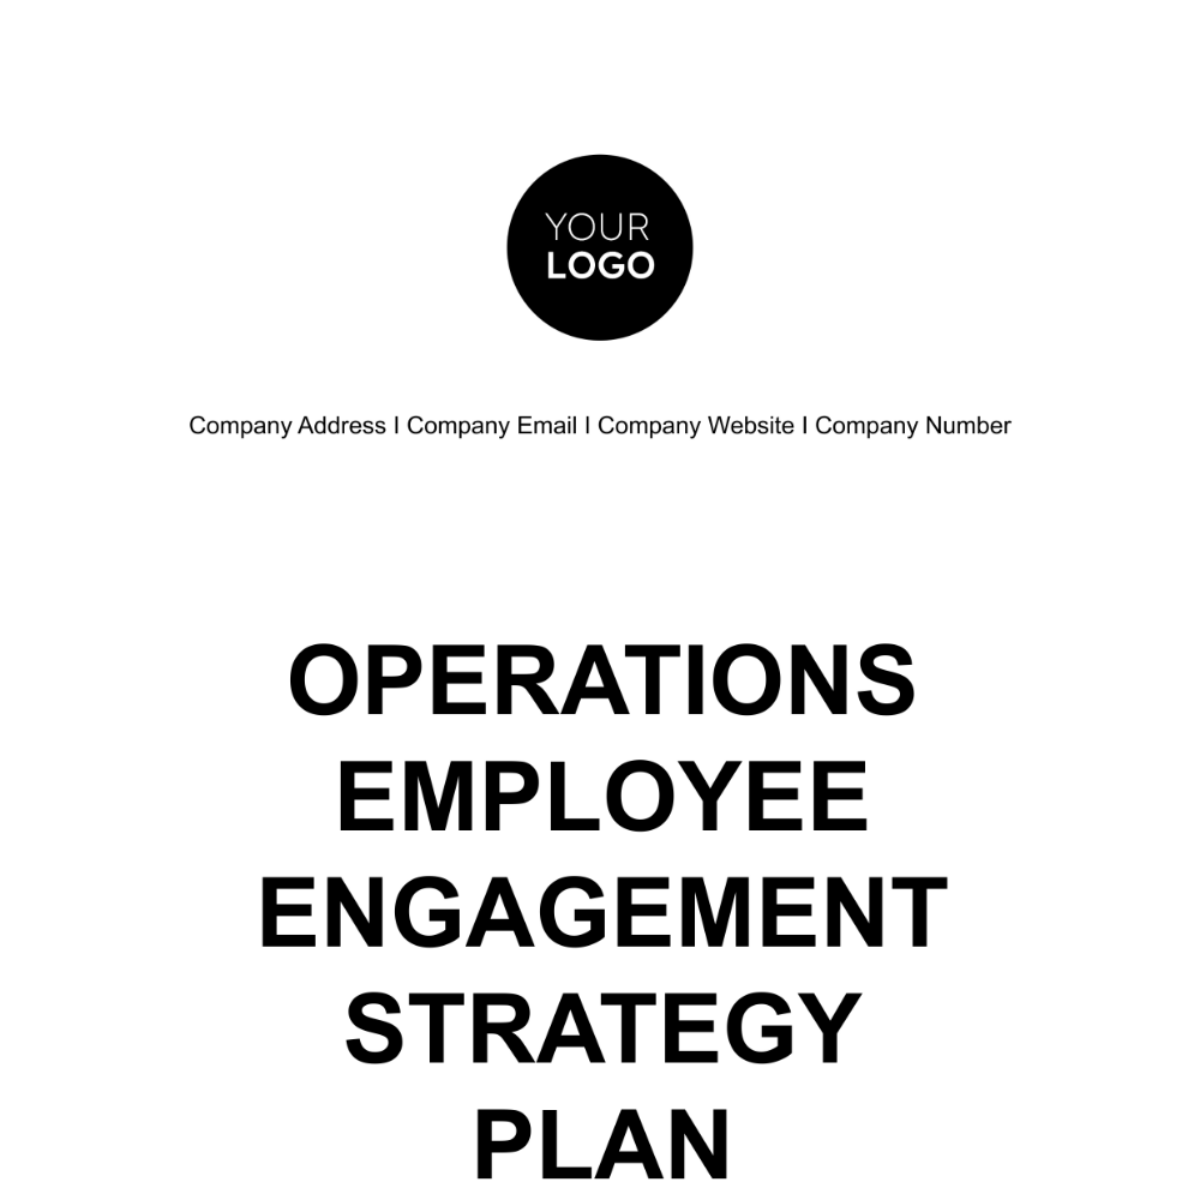 Operations Employee Engagement Strategy Plan Template